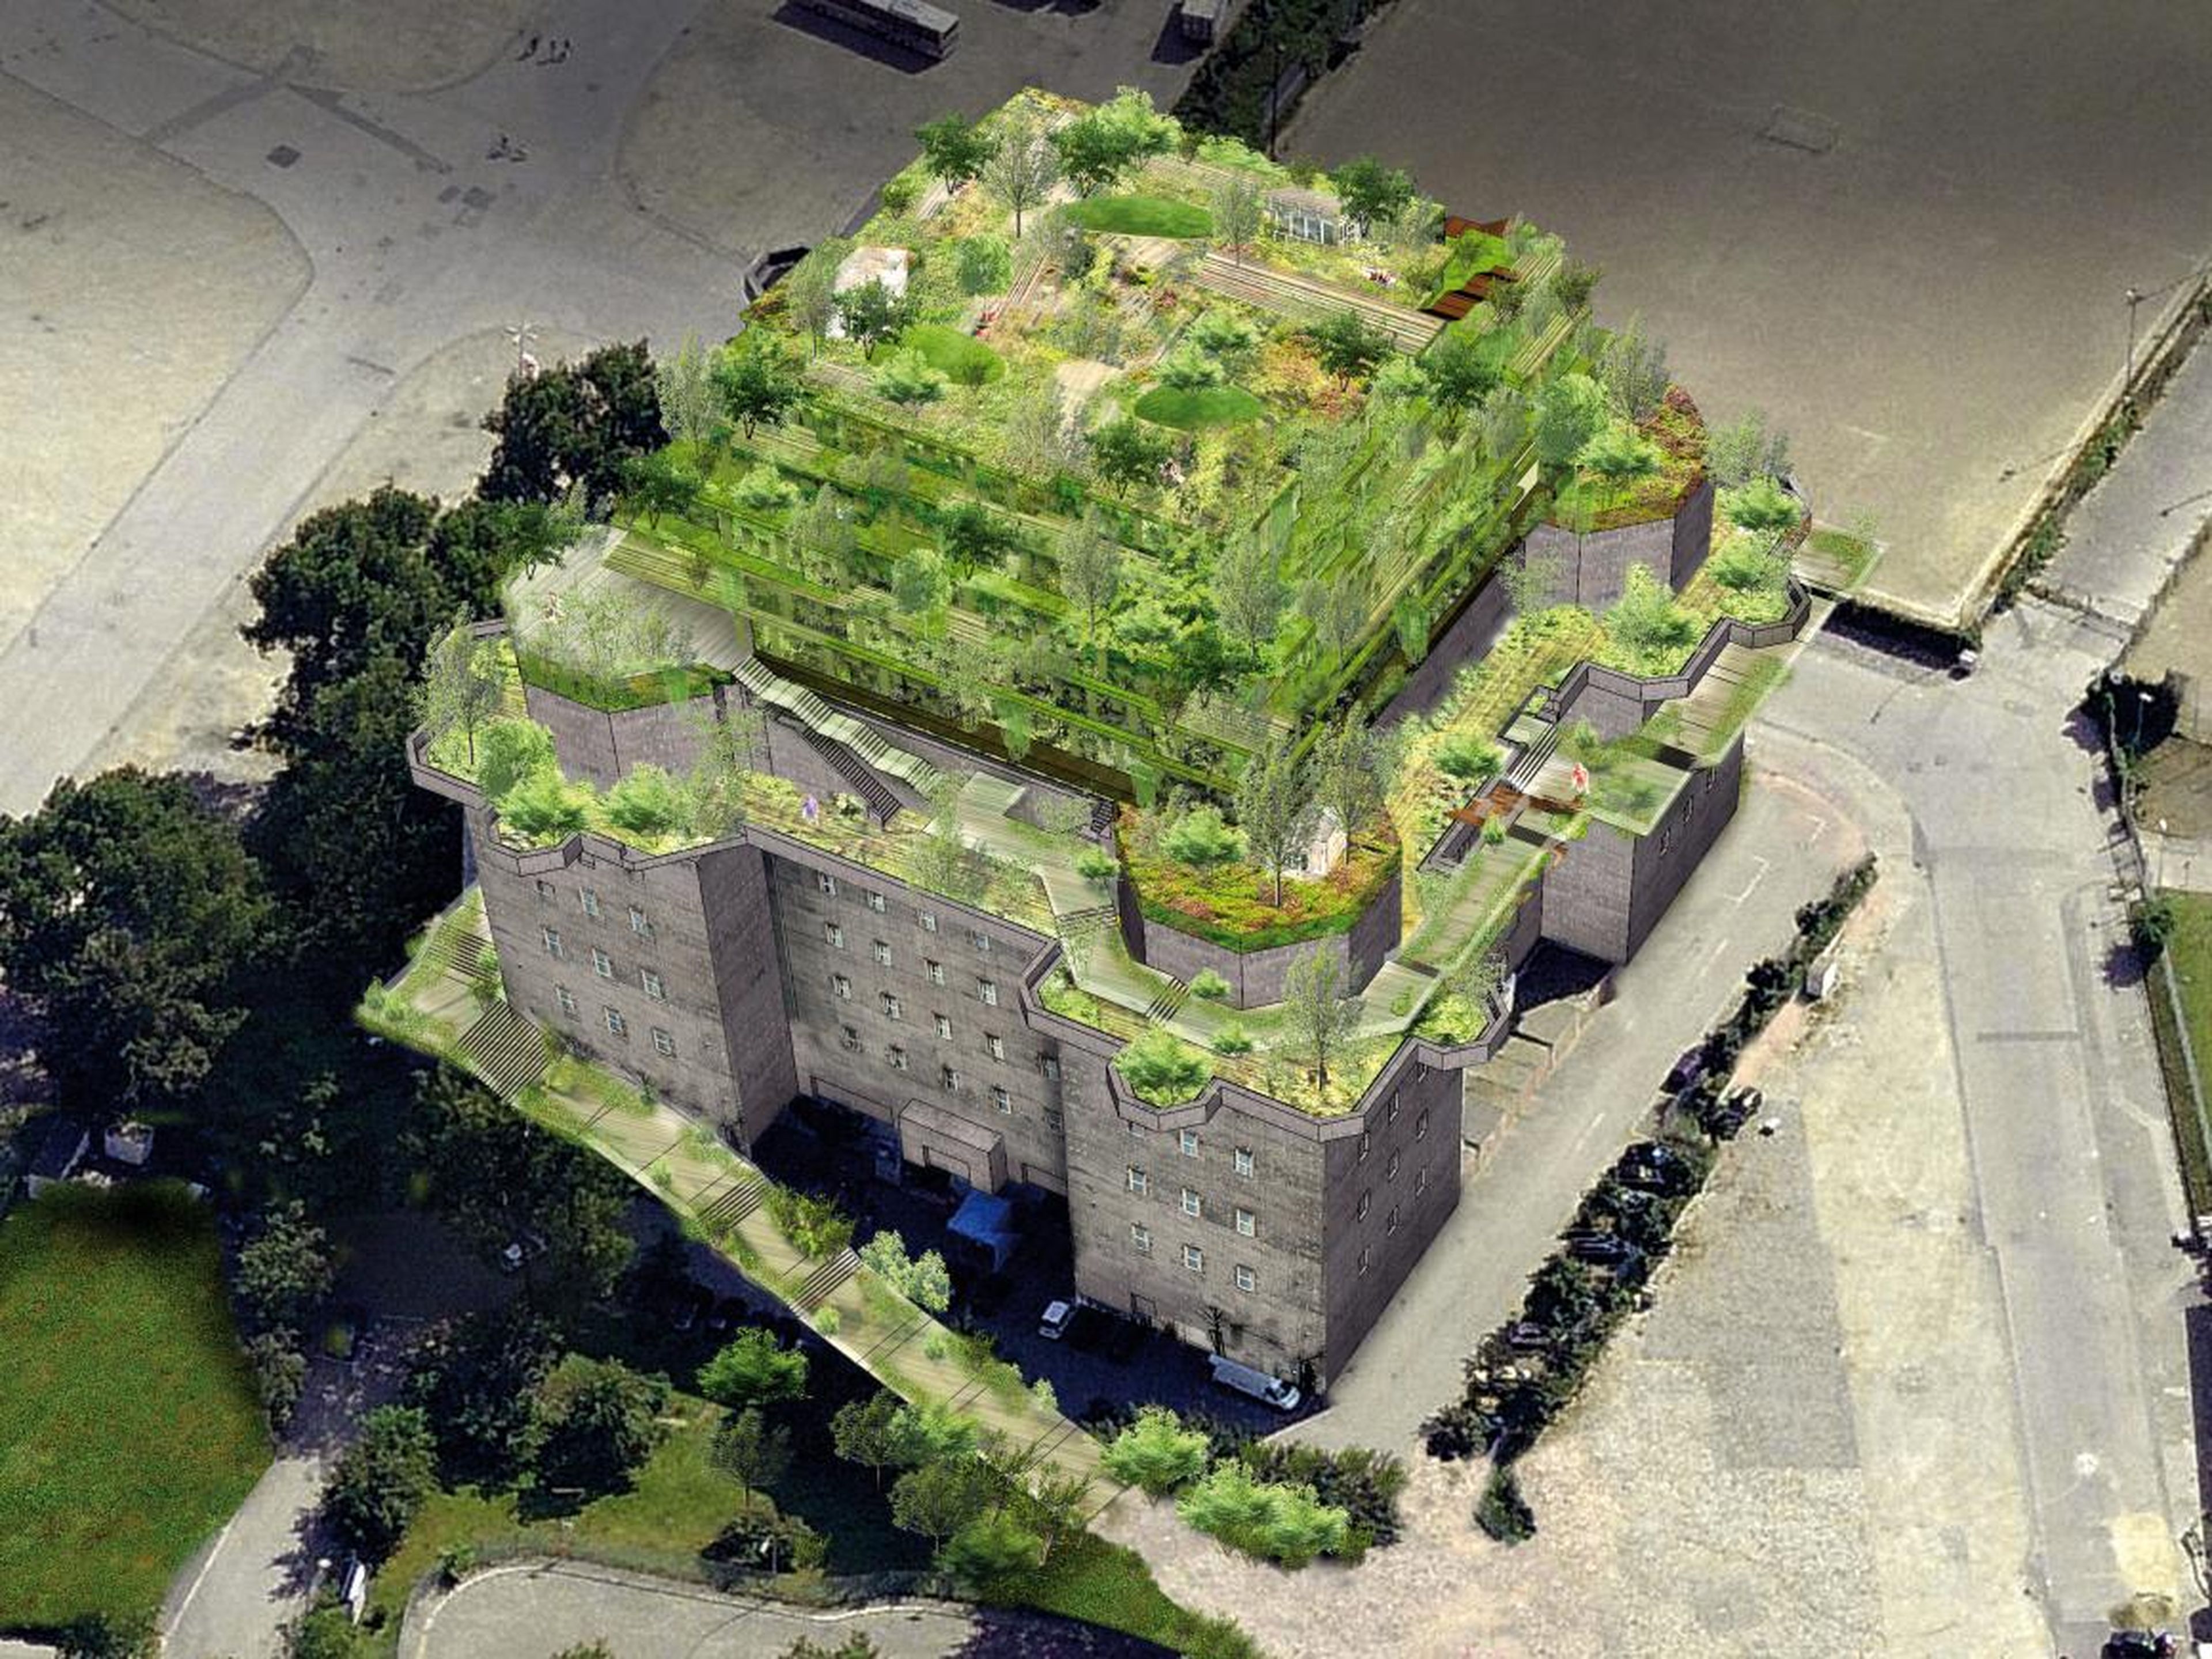 A former Nazi bunker in Germany is being turned into an upscale hotel with a 5-storey roof garden